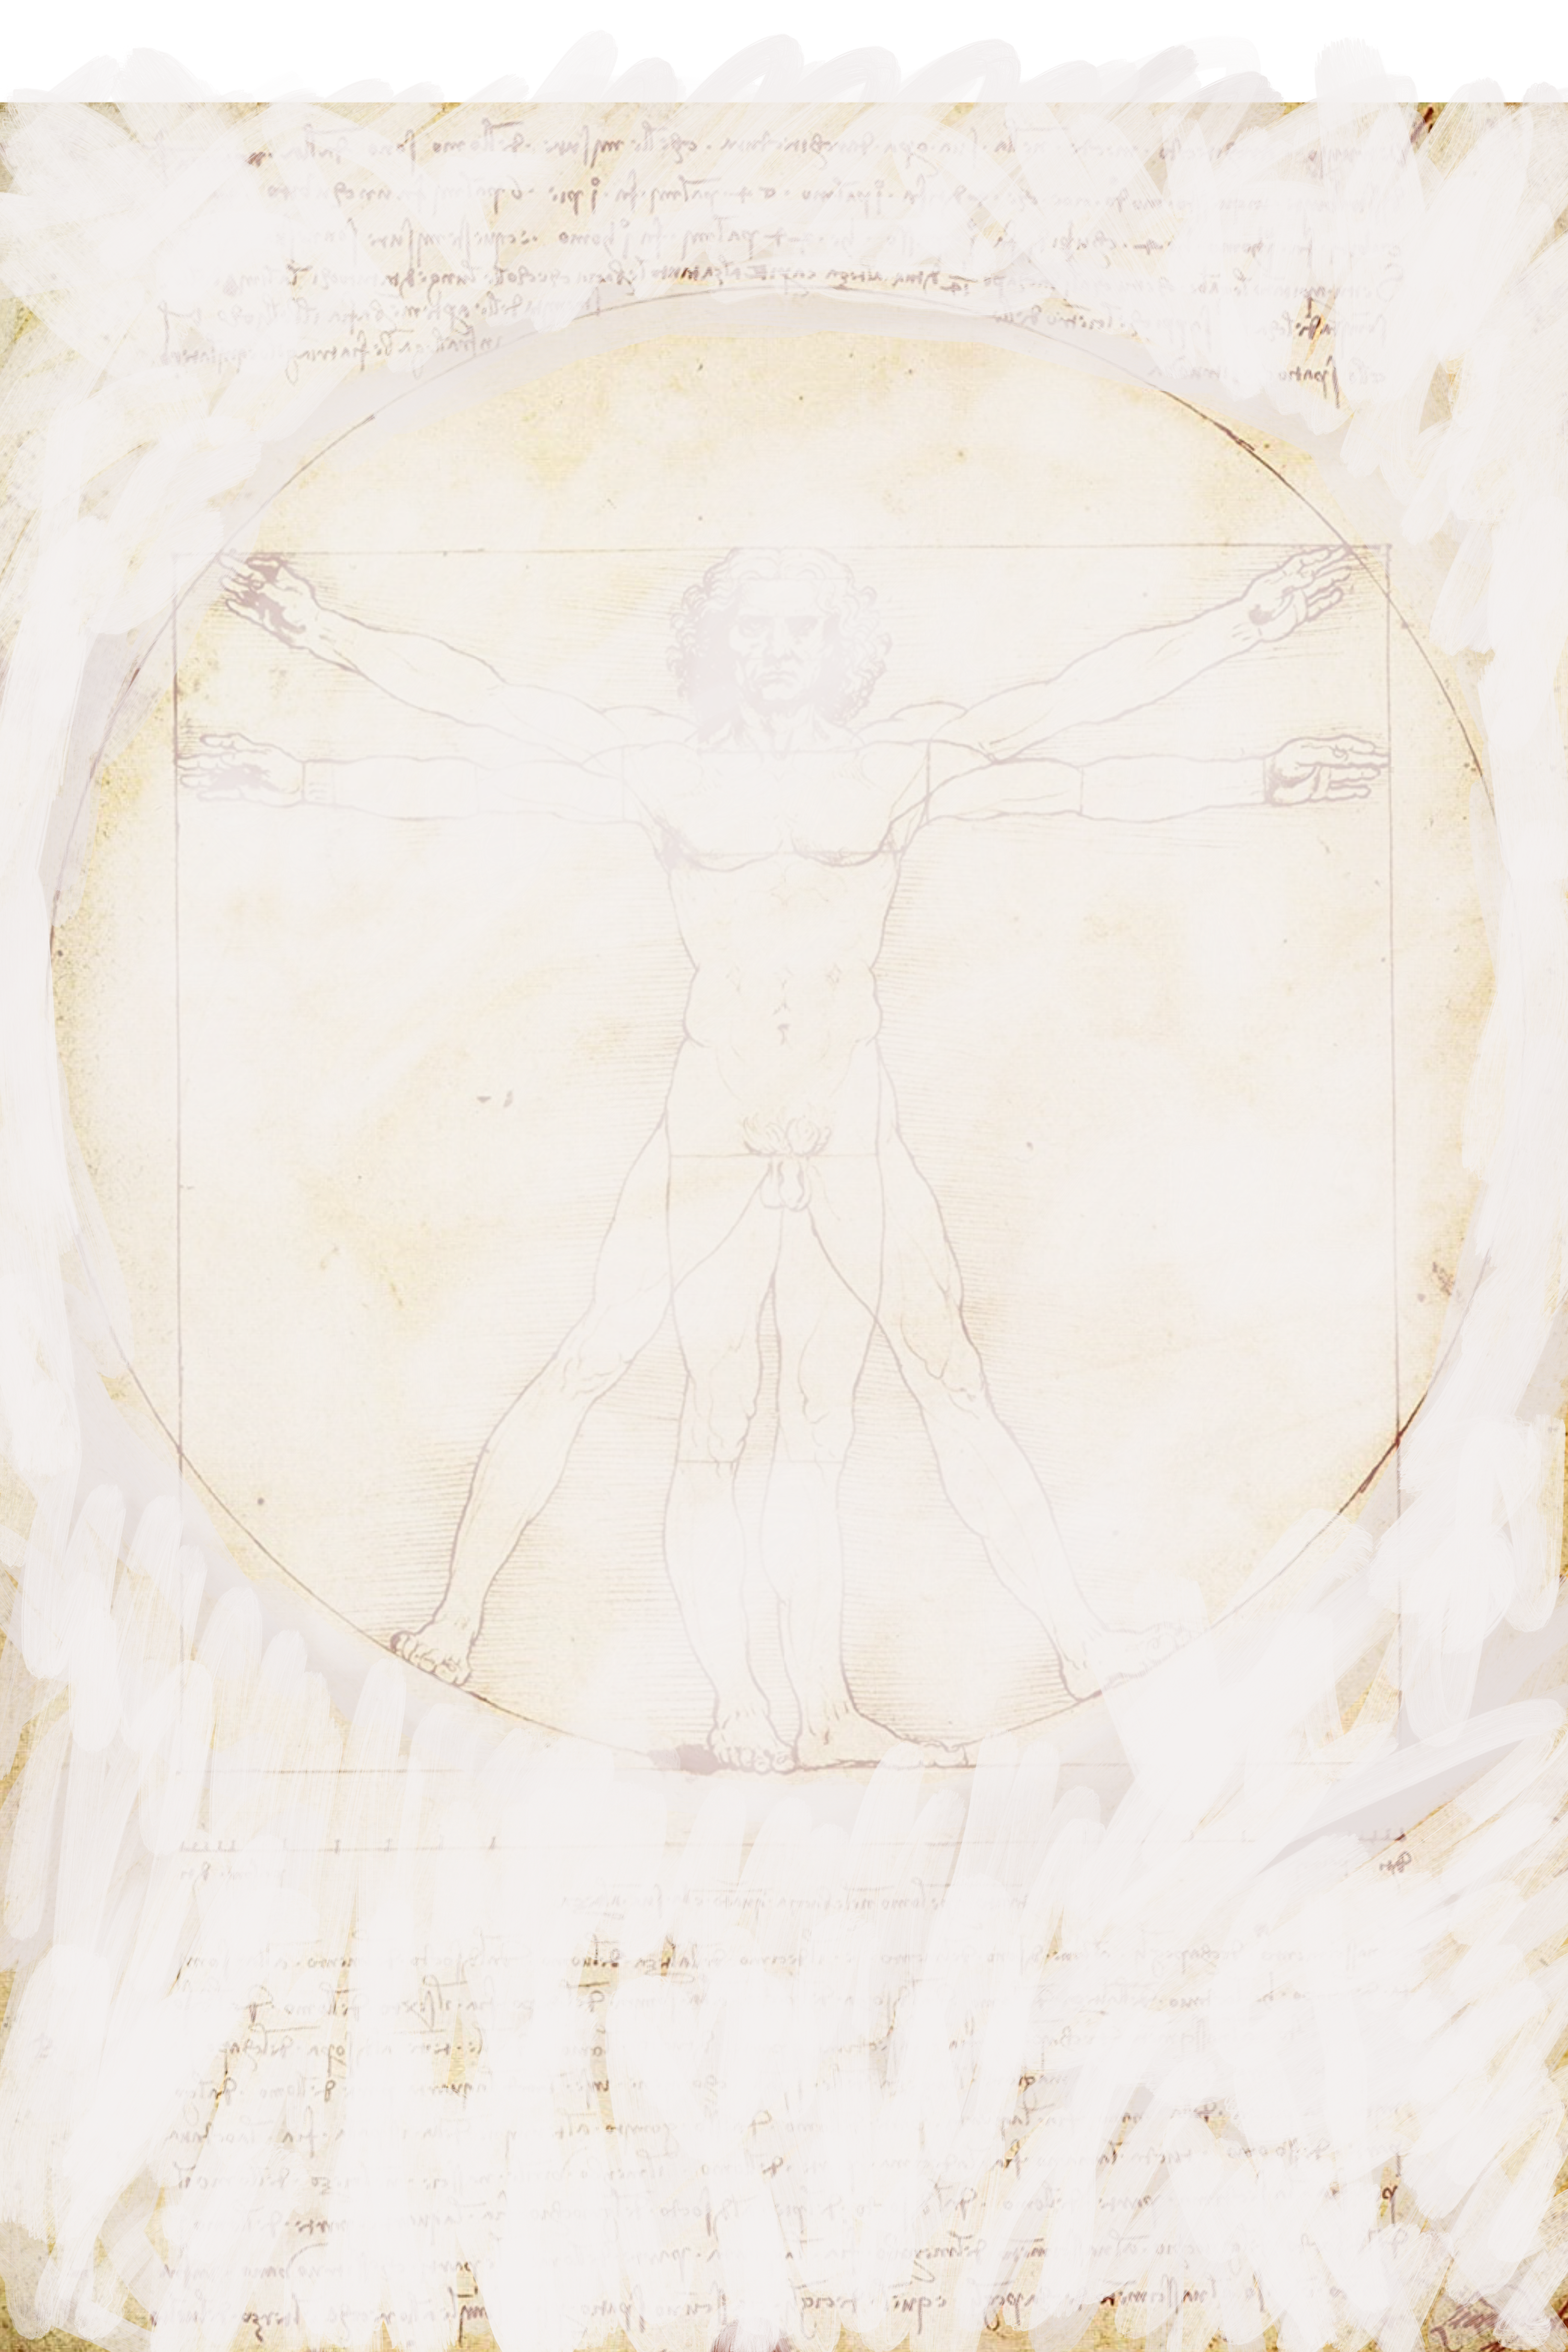 Study for On the shoulders of Davinci No. 1